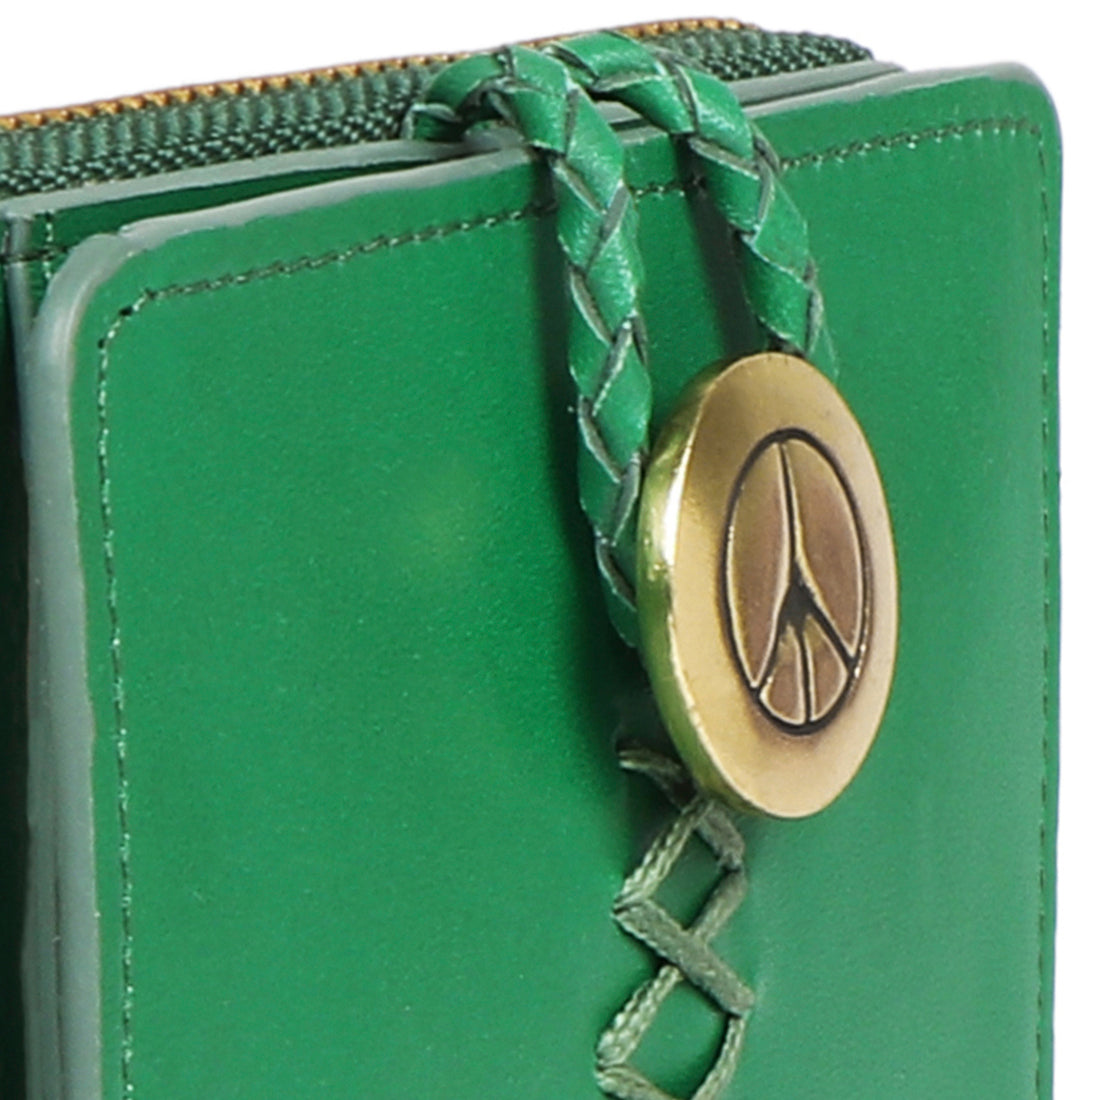 Emerald Green Leather Wallet Large Soft Leather Women Purse Big Simple  Wallet Vivid Green Purse Christmas Gift Idea - Etsy | Wallets for women  leather, Wallets for women, Green wallets